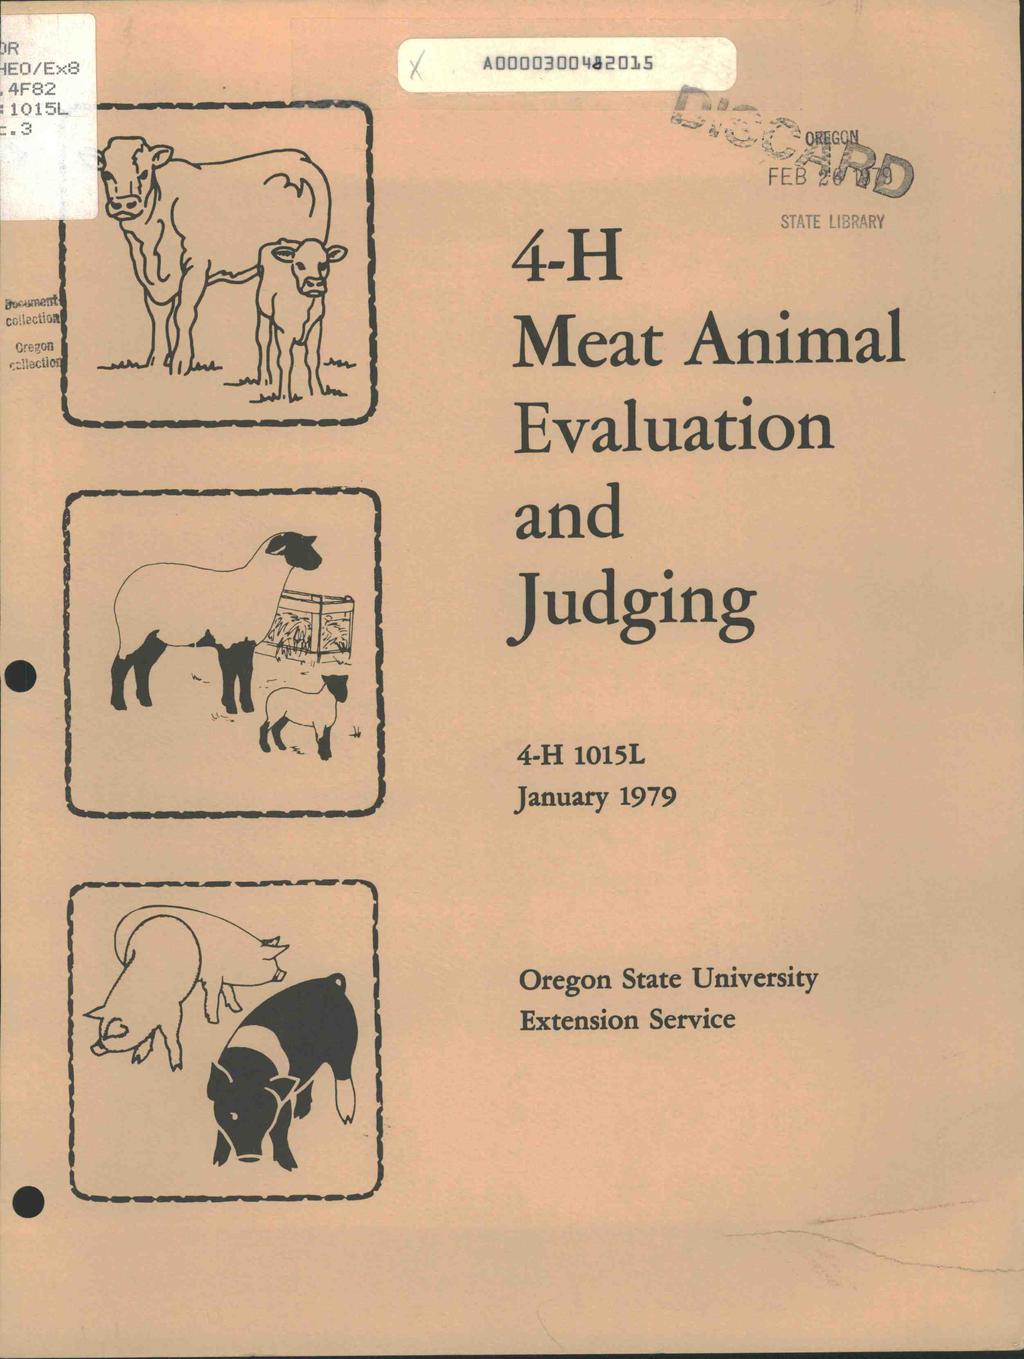 / Ex8 82 15L AOU003OO42O]J5 FEWW 4-H STATE LIBRARY ttc gofl Meat Animal